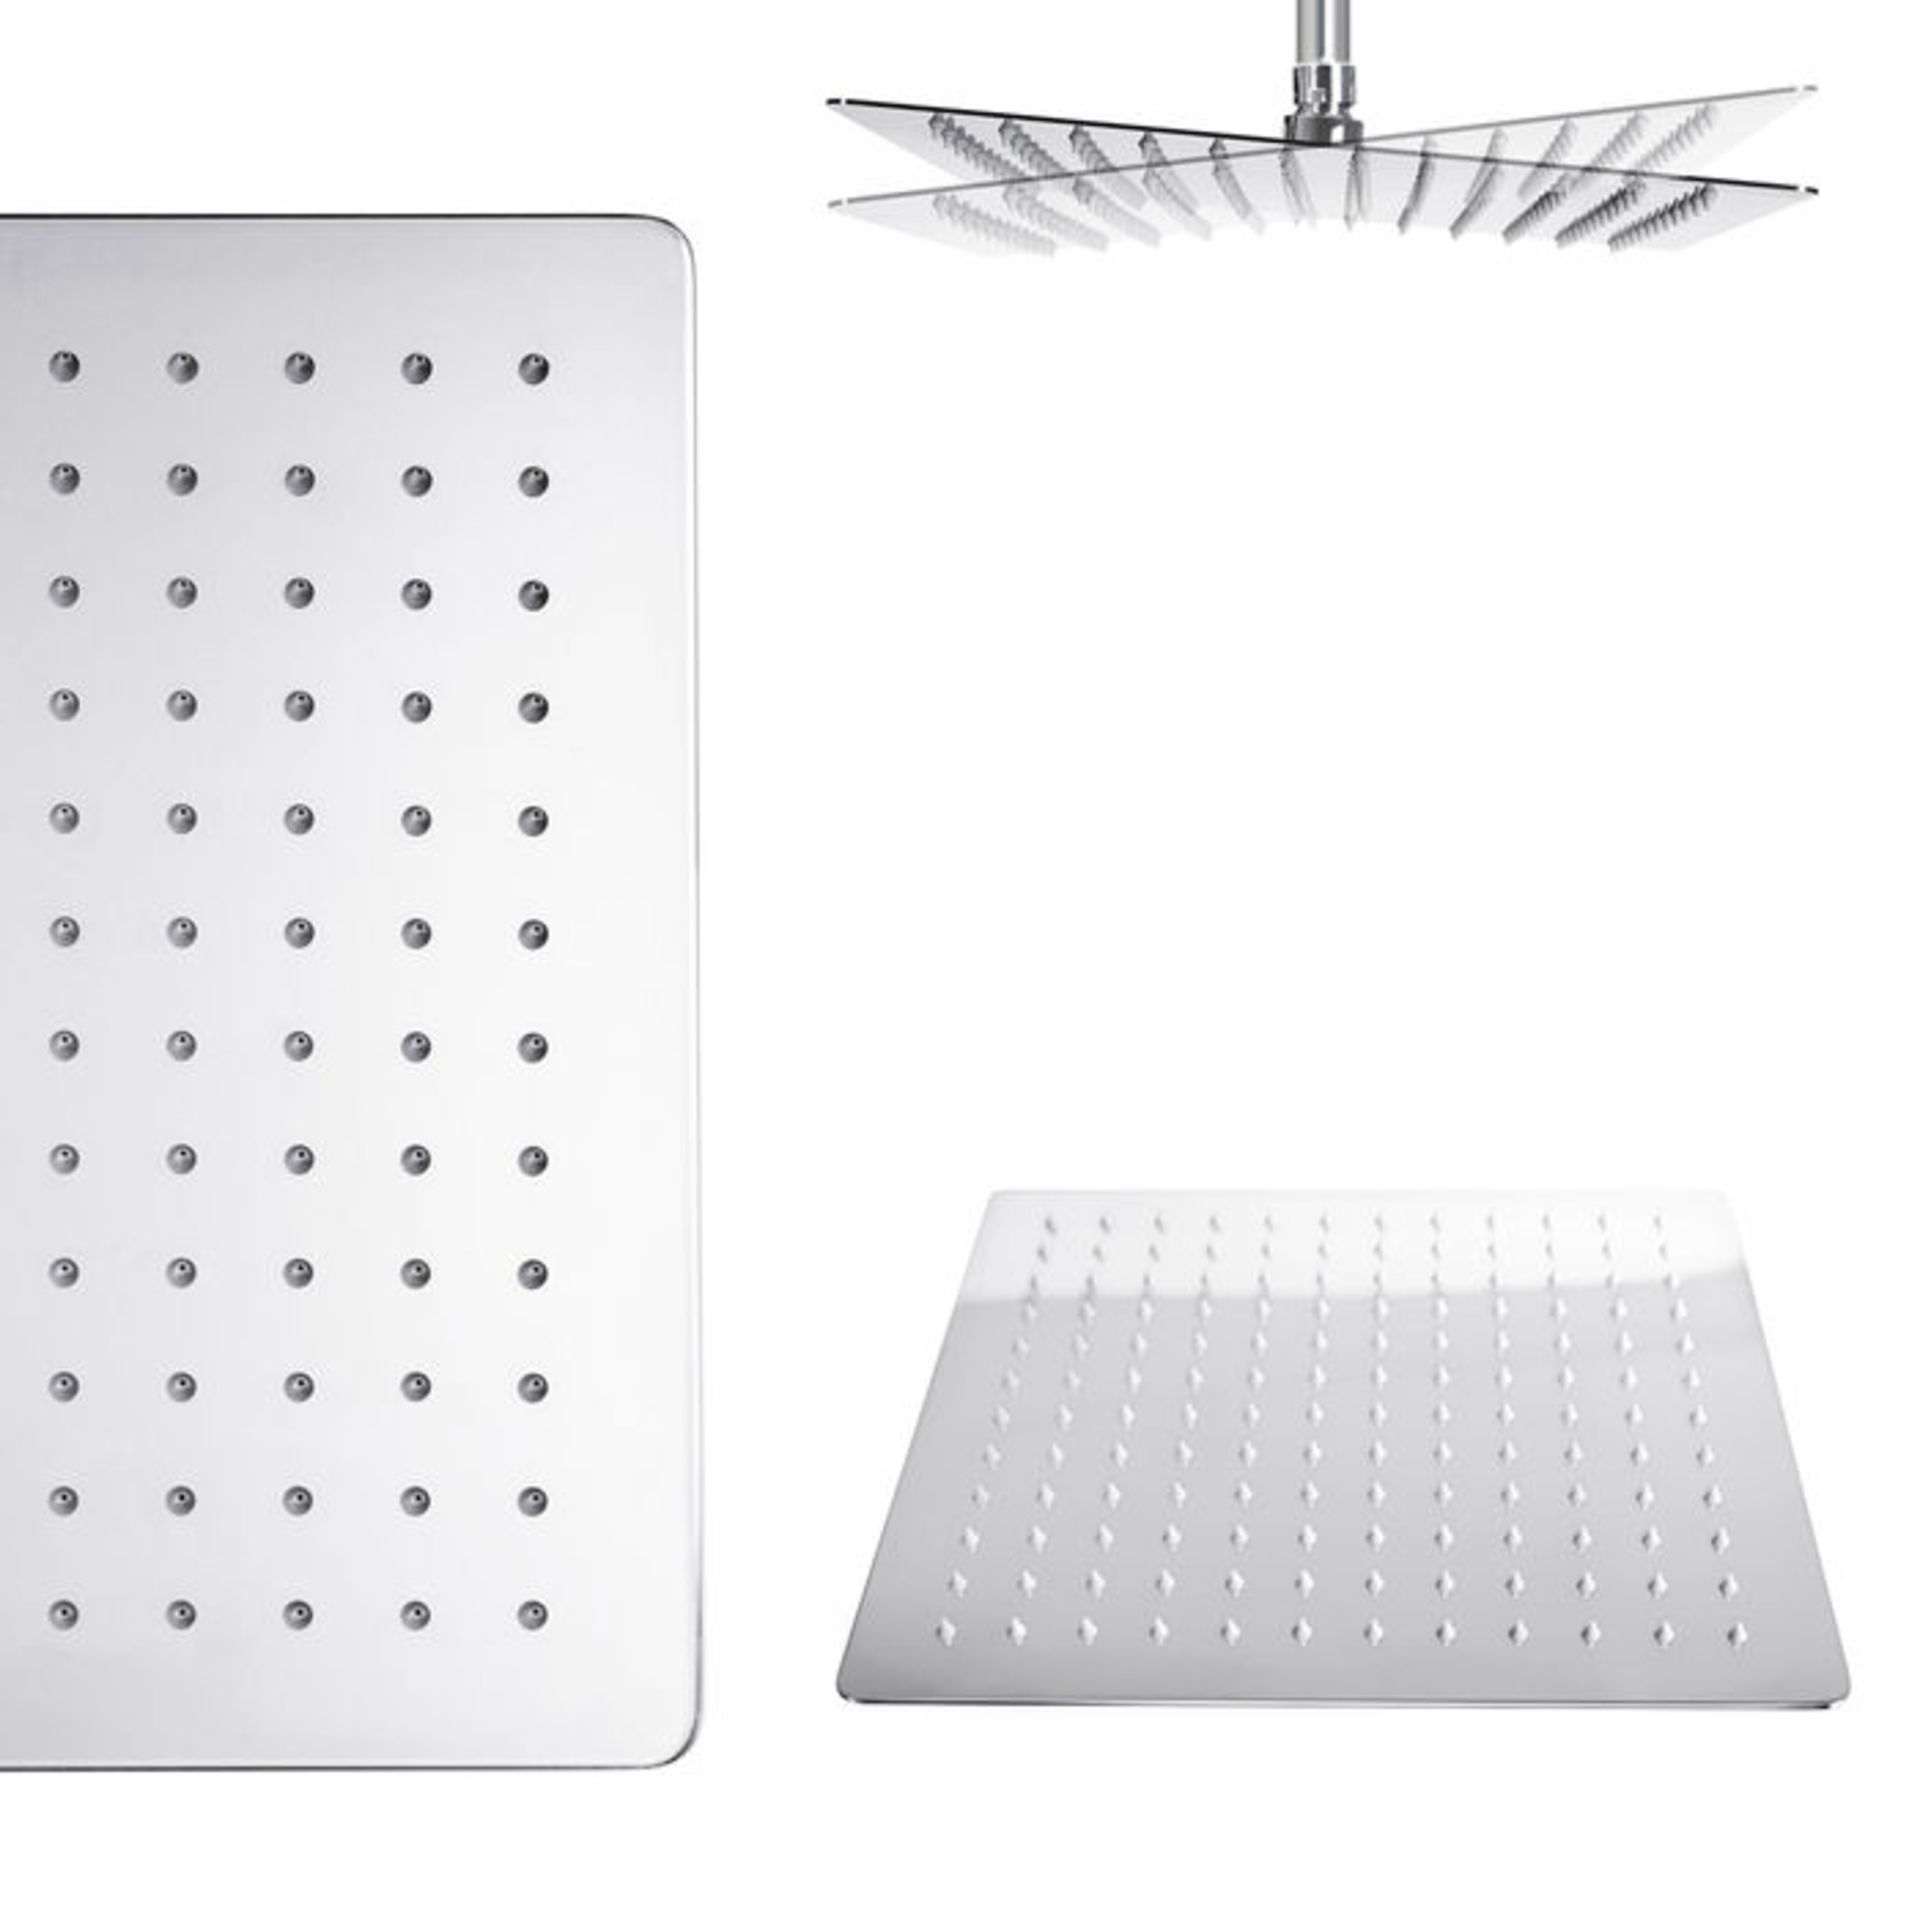 (V13) Stainless Steel 300mm Square Shower Head Solid metal structure Can be wall or ceiling